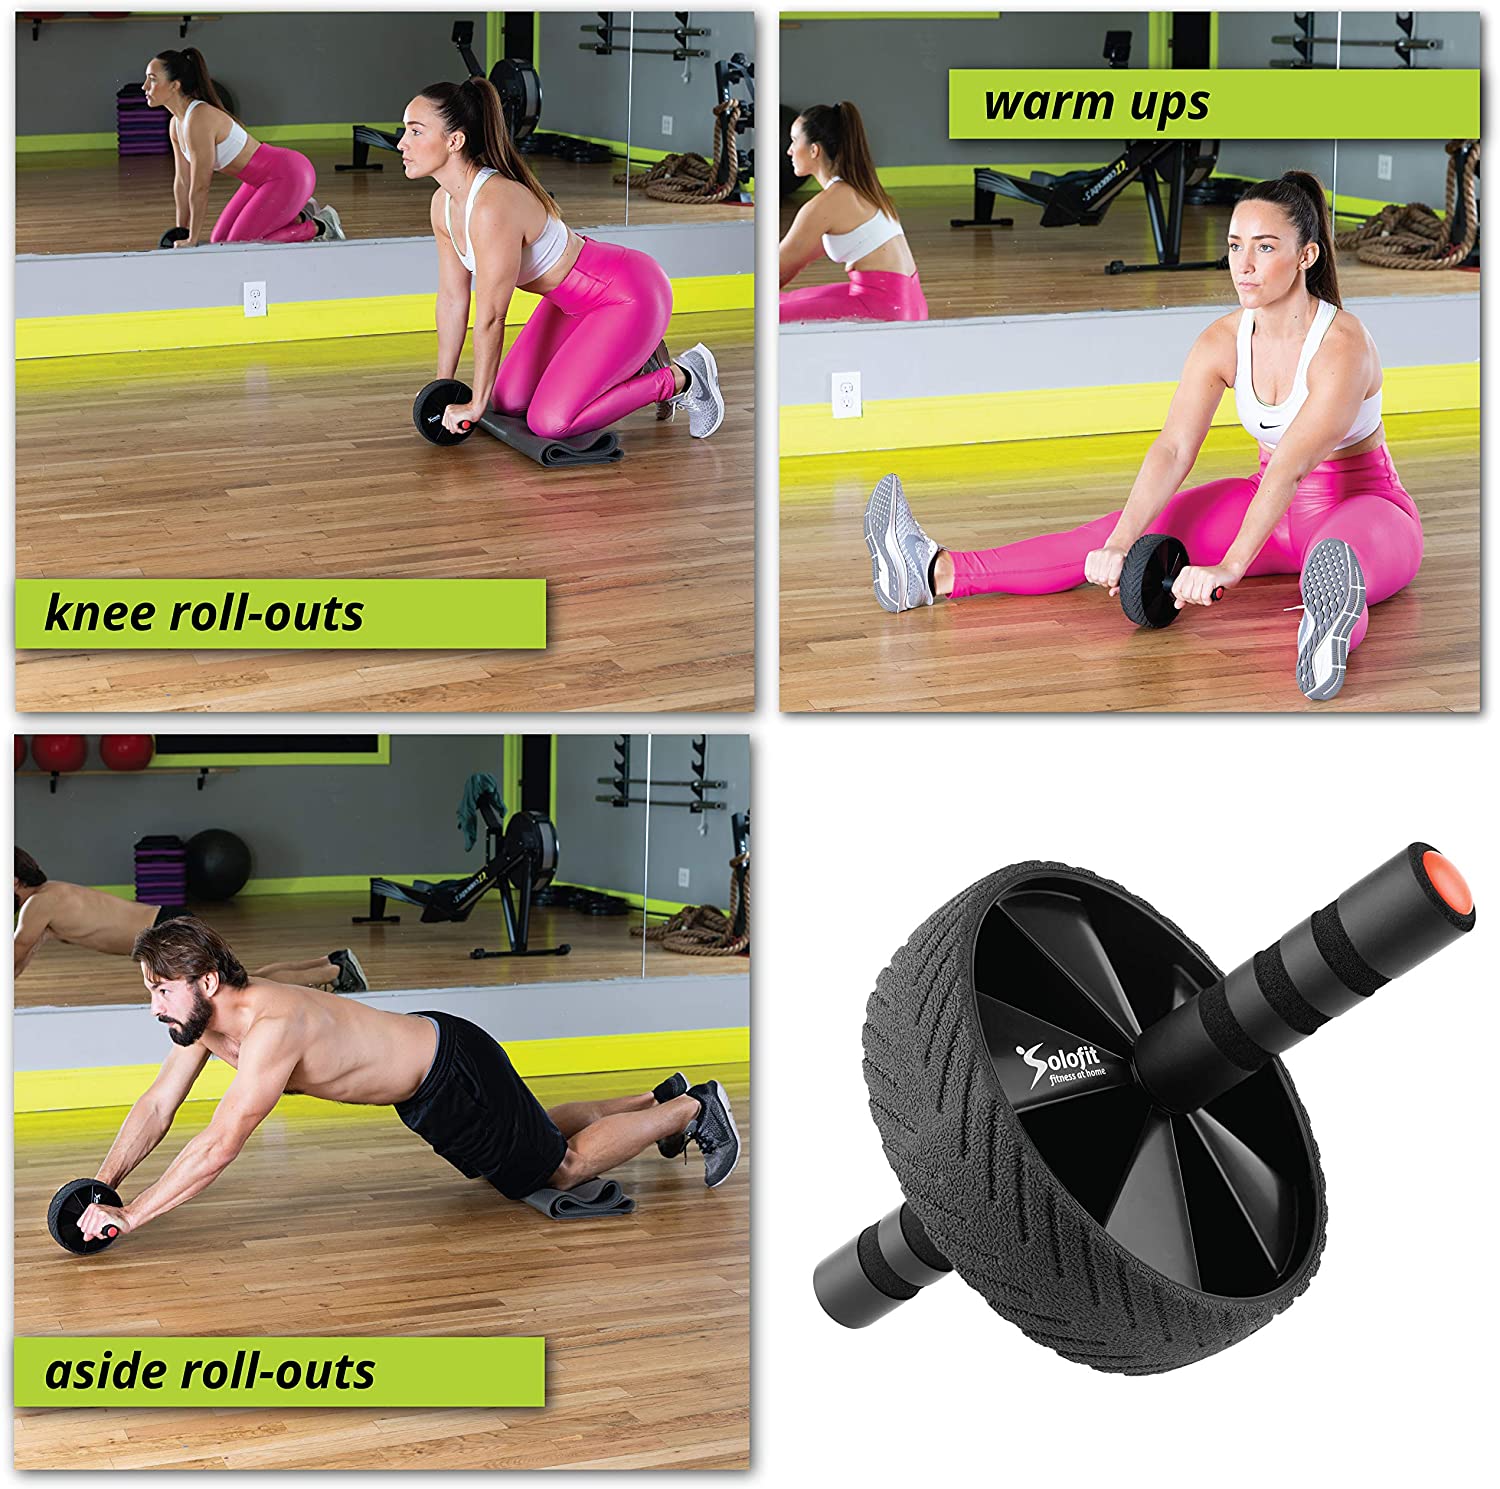 SoloFit Ab Roller Wheel for Abs Workout – Fitness Abdominal Trainer Exercise Equipment - image 3 of 7